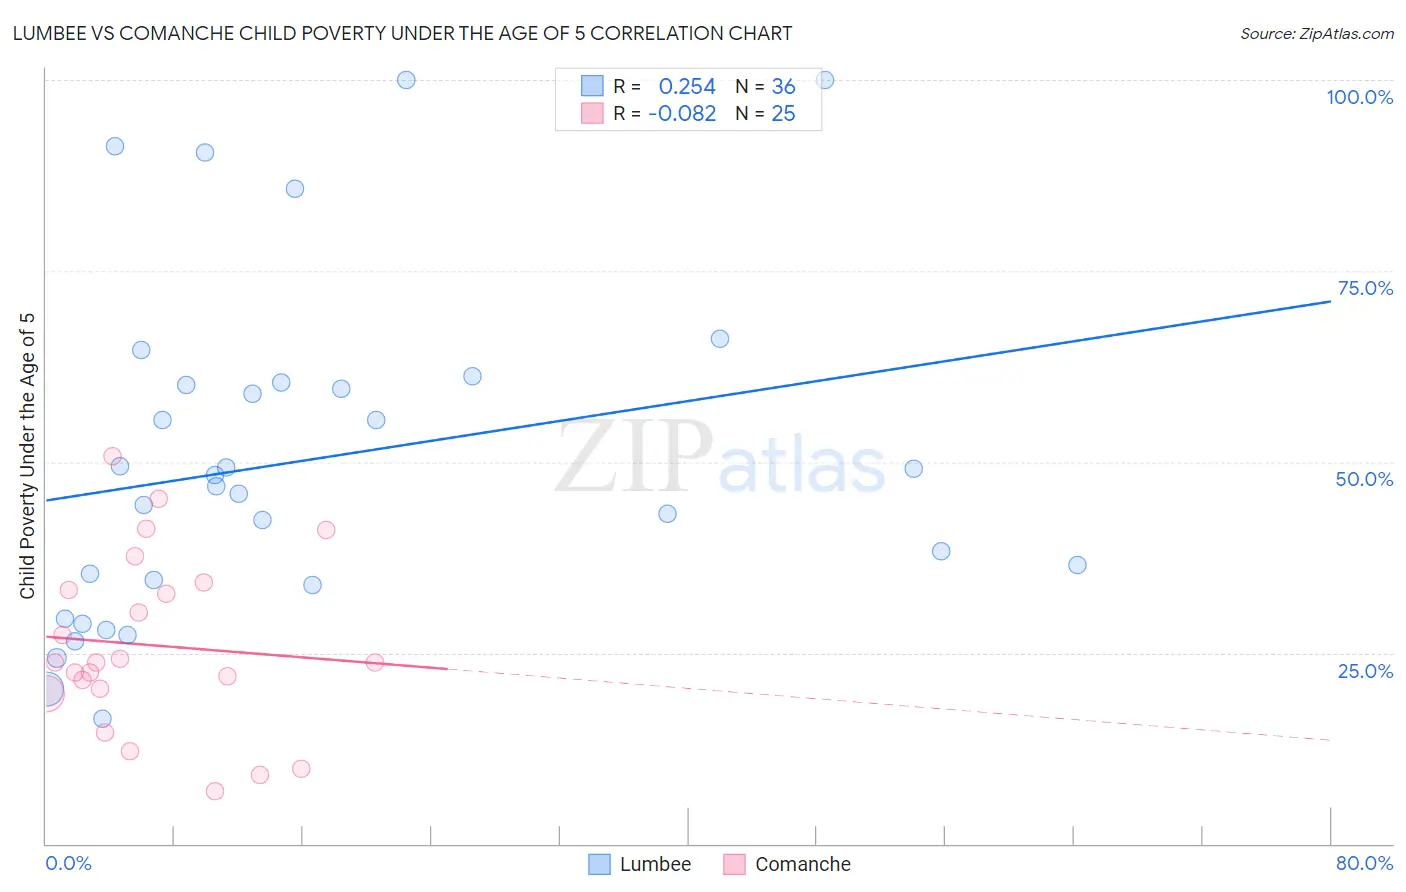 Lumbee vs Comanche Child Poverty Under the Age of 5